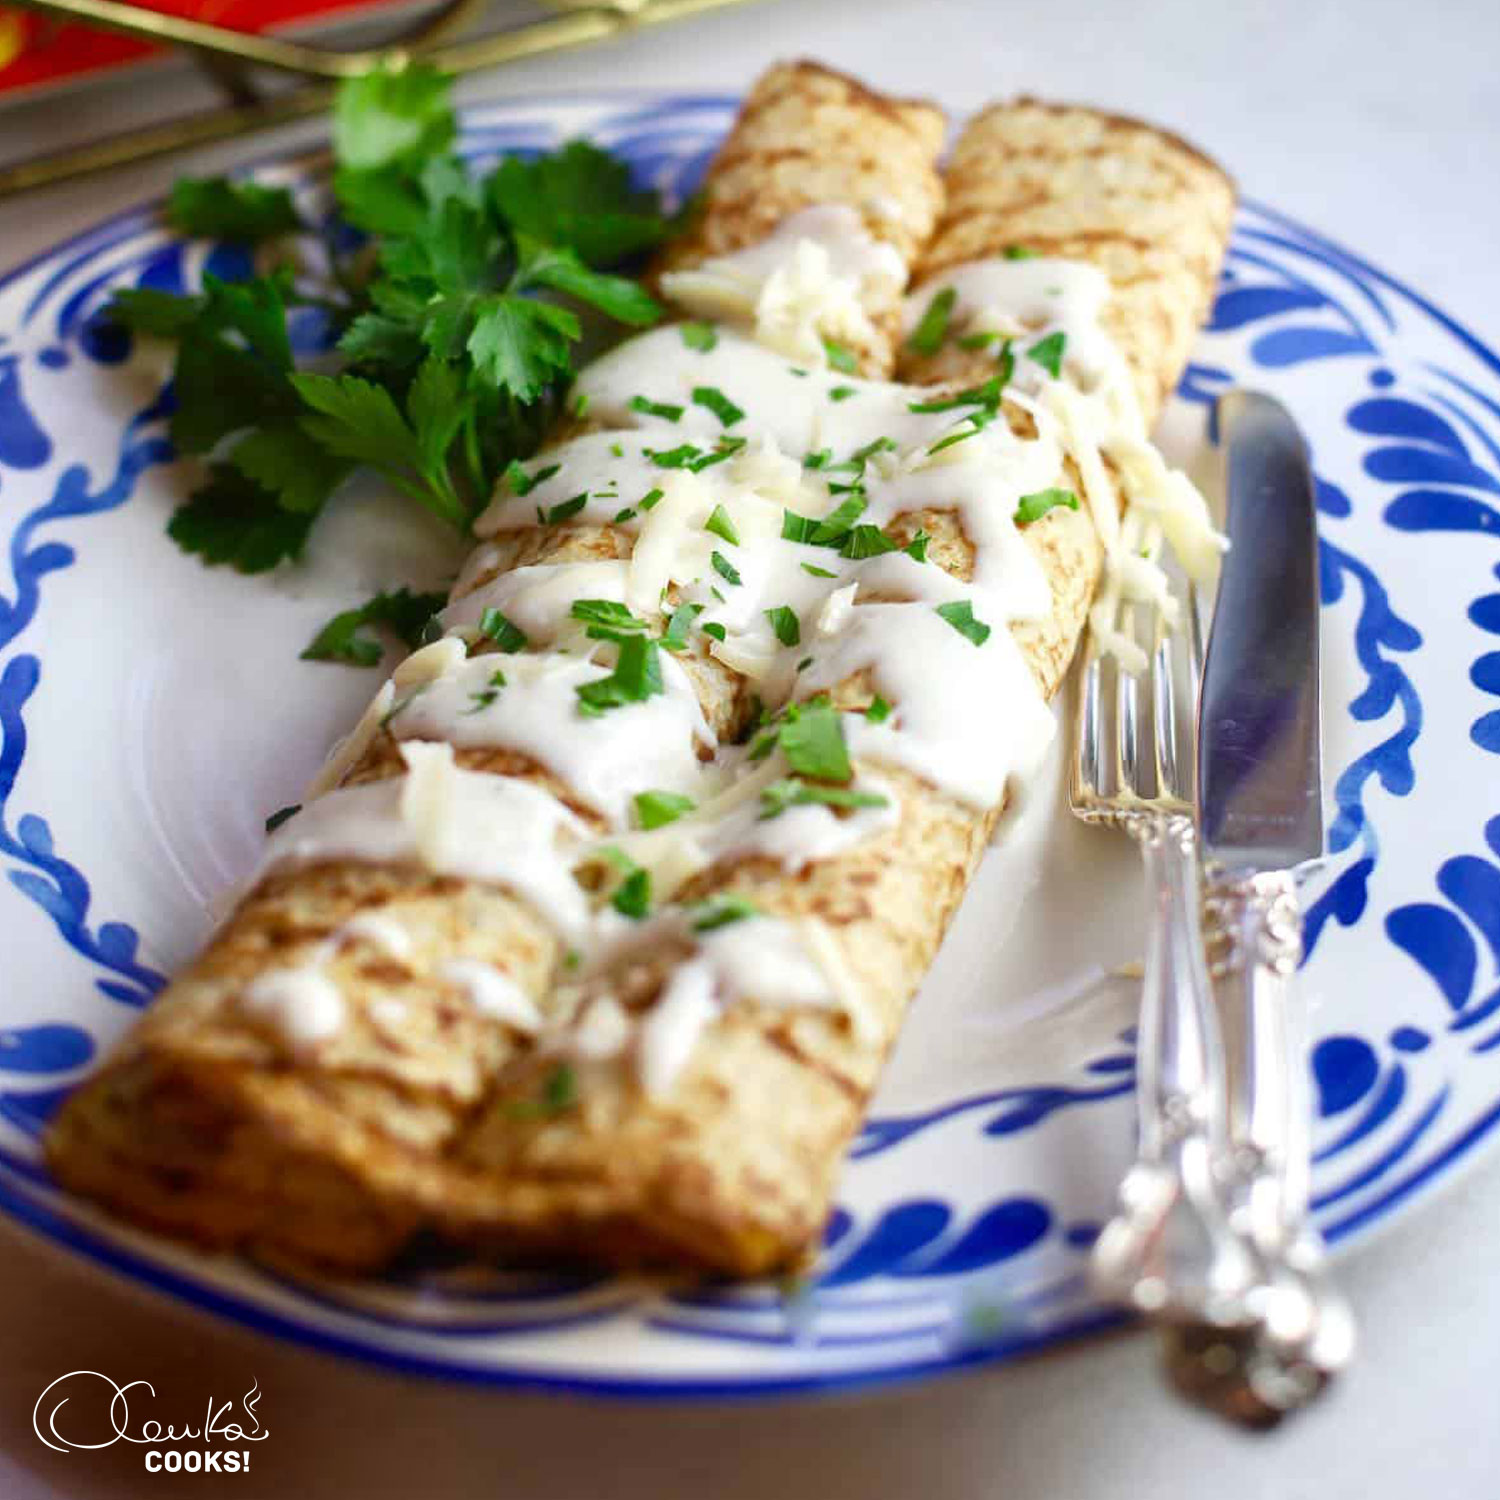 Crepes stuffed with chicken and bechamel